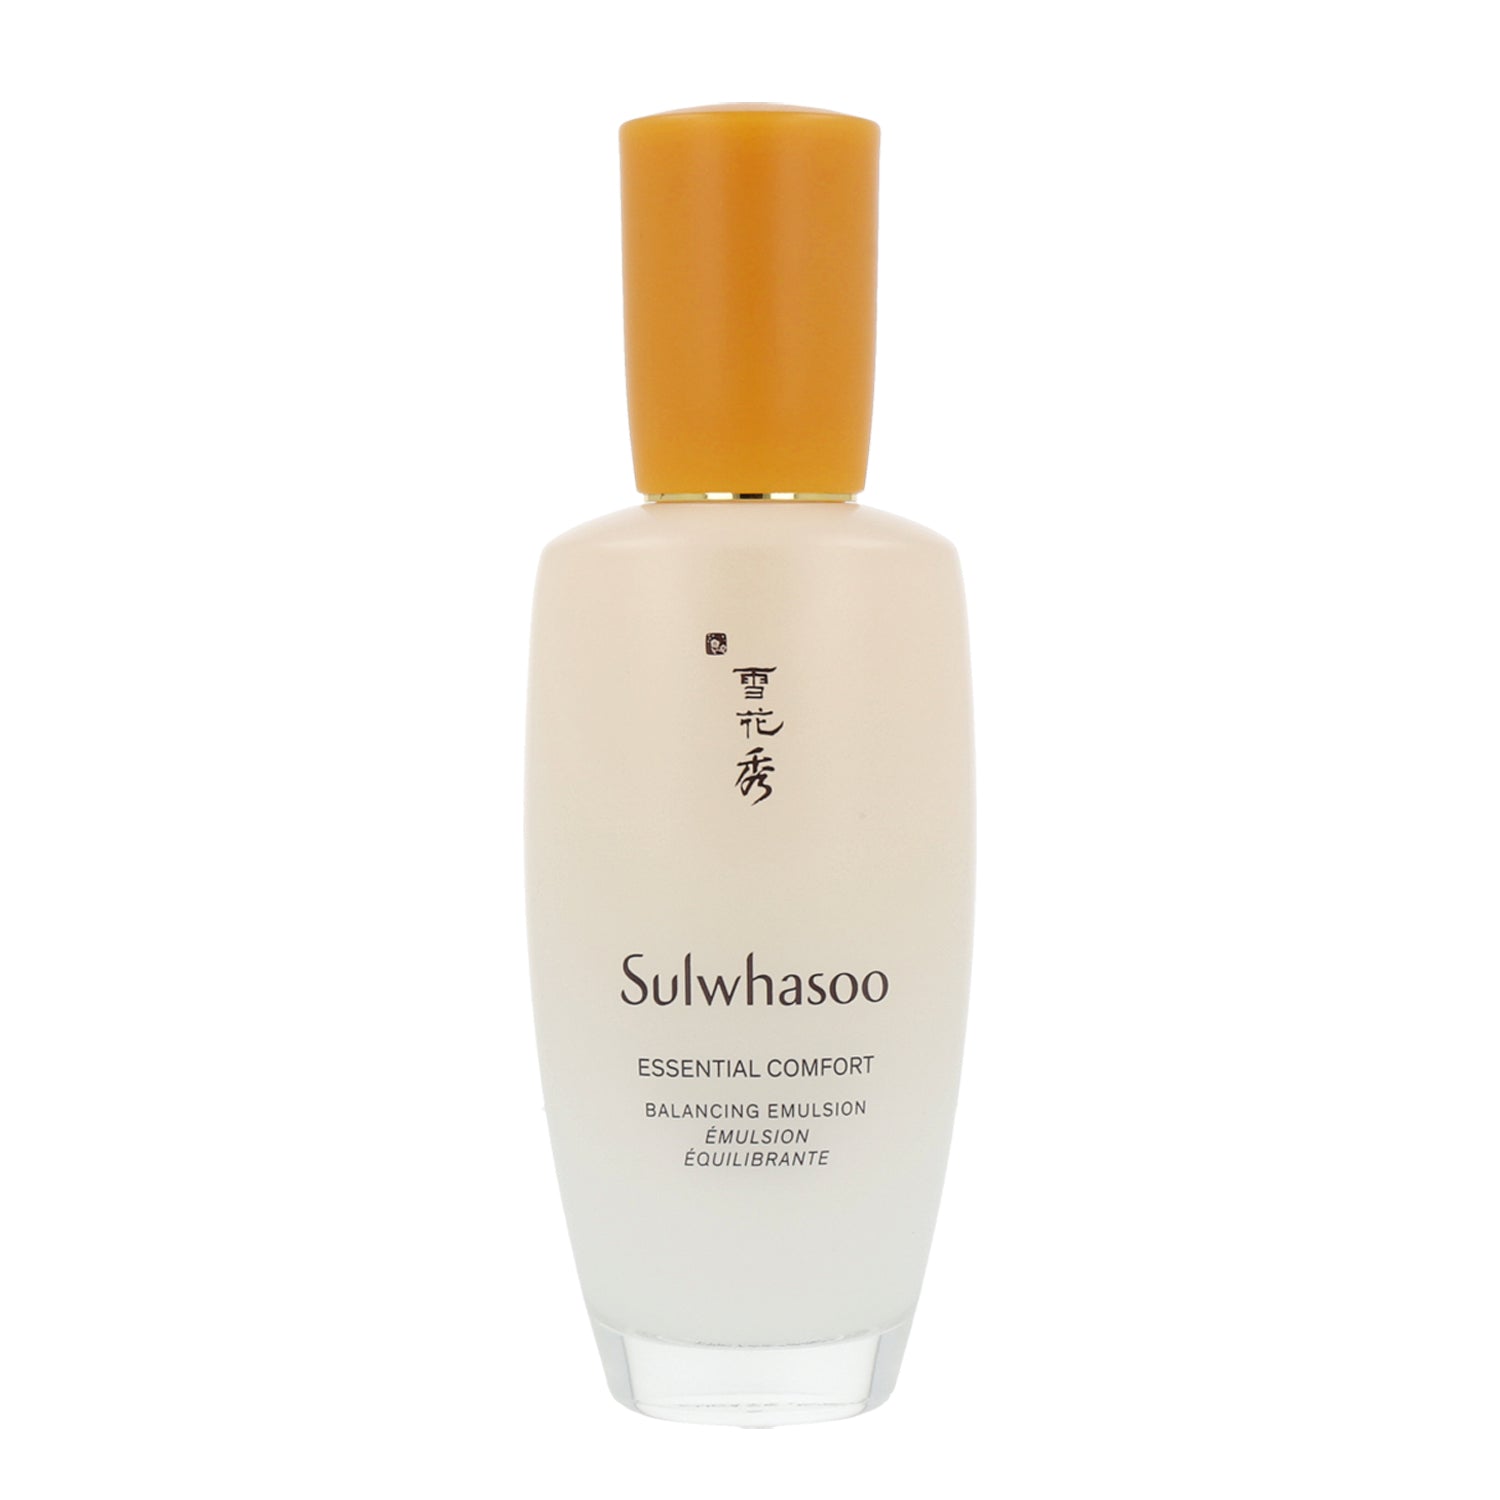 Essential oil cleansing oil by Sulwhasoo, part of the Firming Care Essential Ritual Set